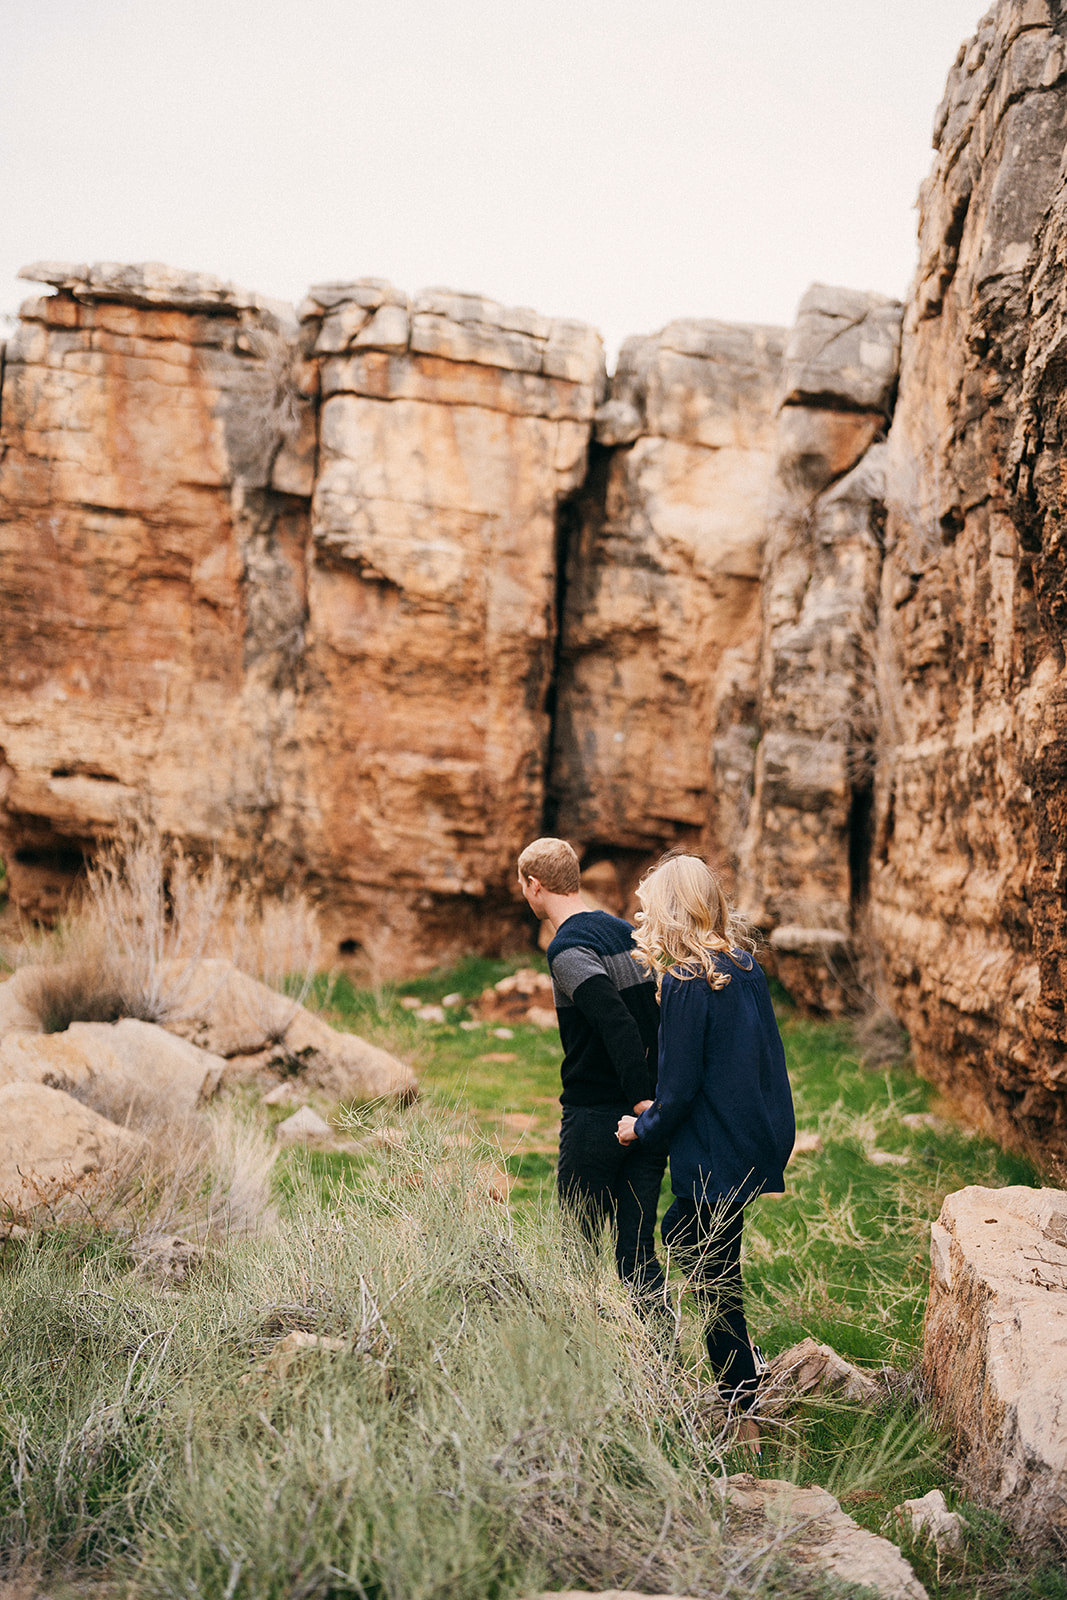 southern utah engagement session in a canyon with grass